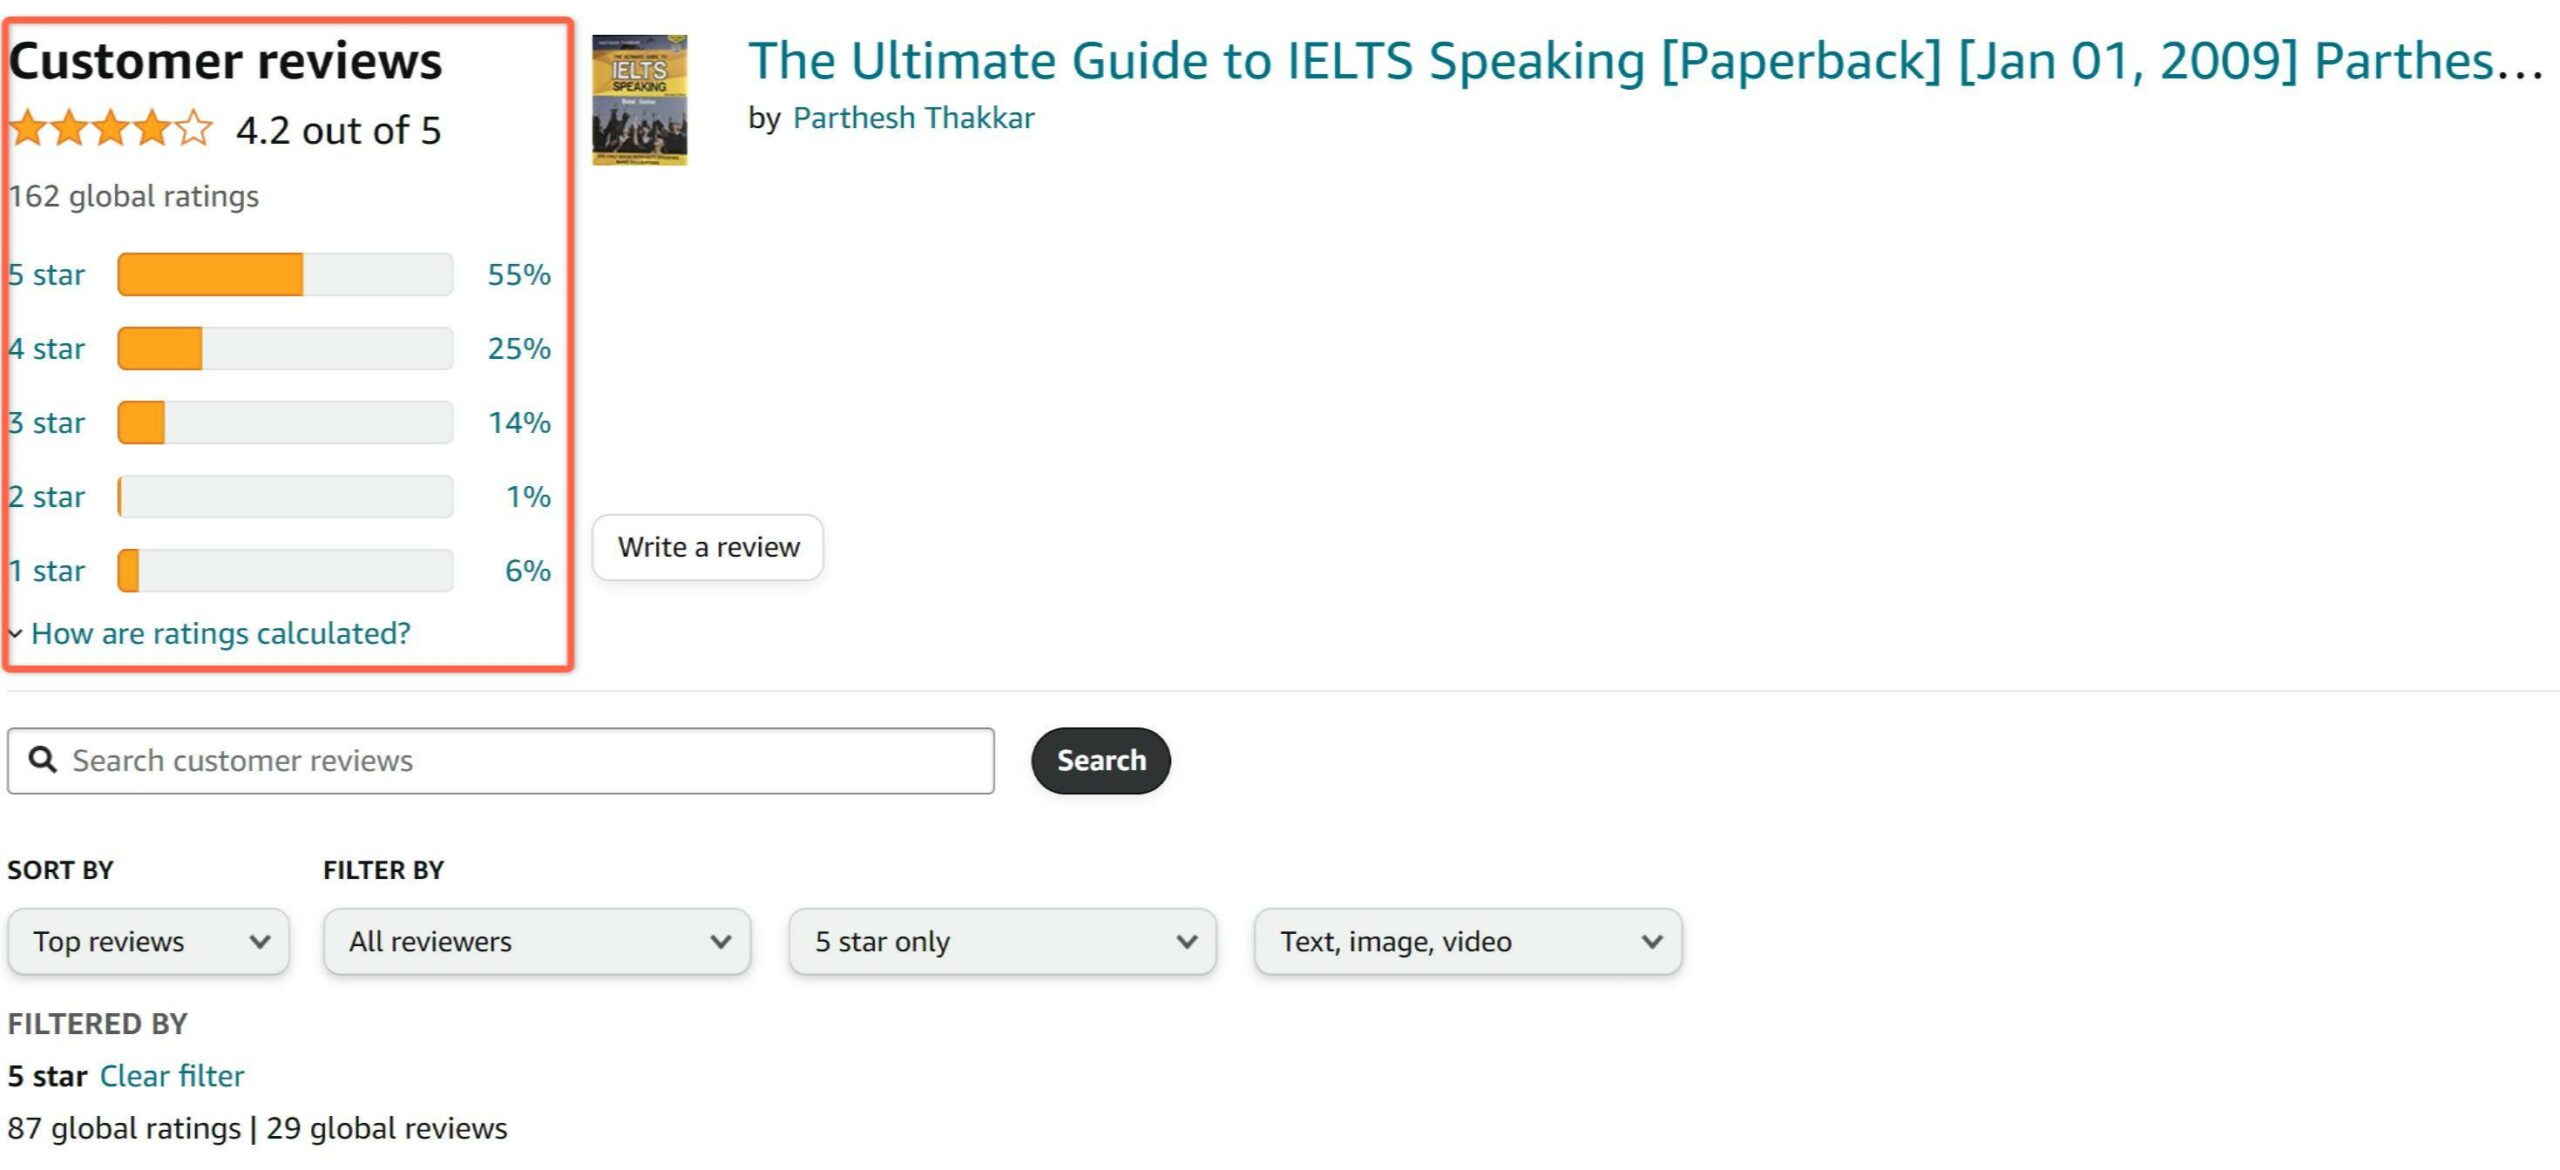 The Ultimate Guide to IELTS Speaking Amazon 2